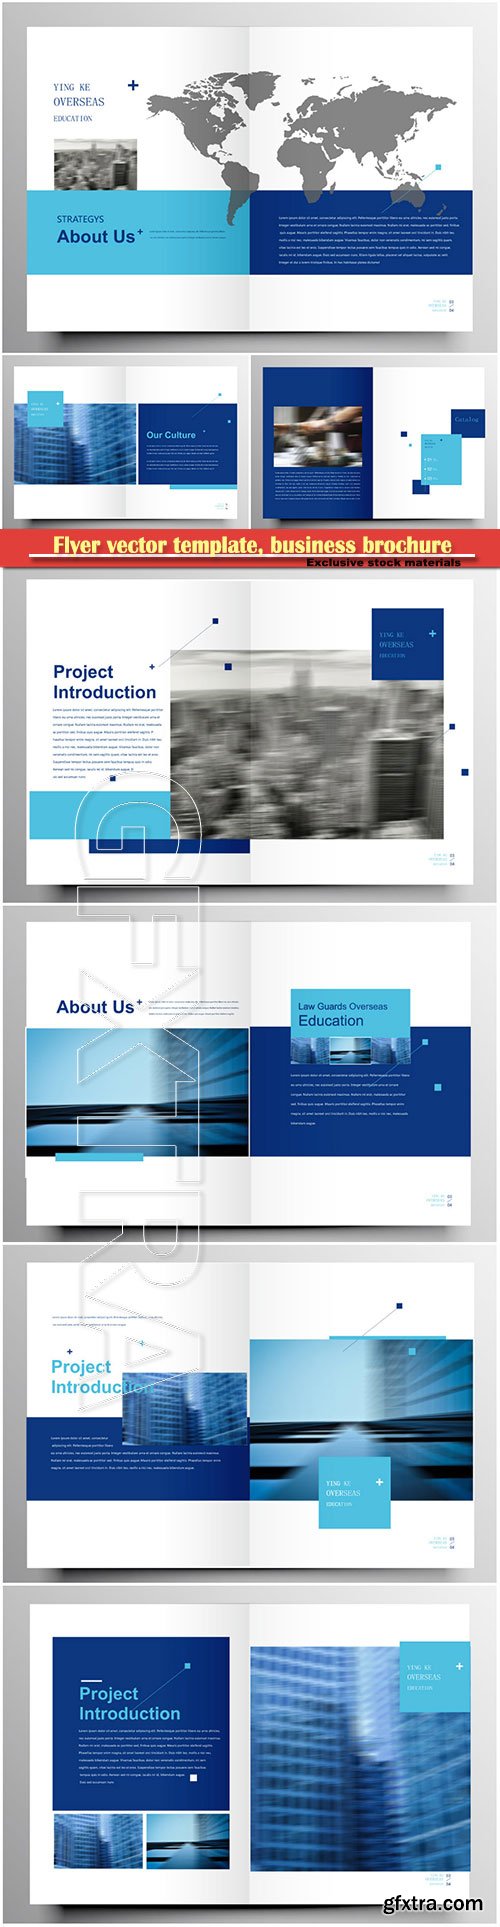 Flyer vector template, business brochure, magazine cover # 9